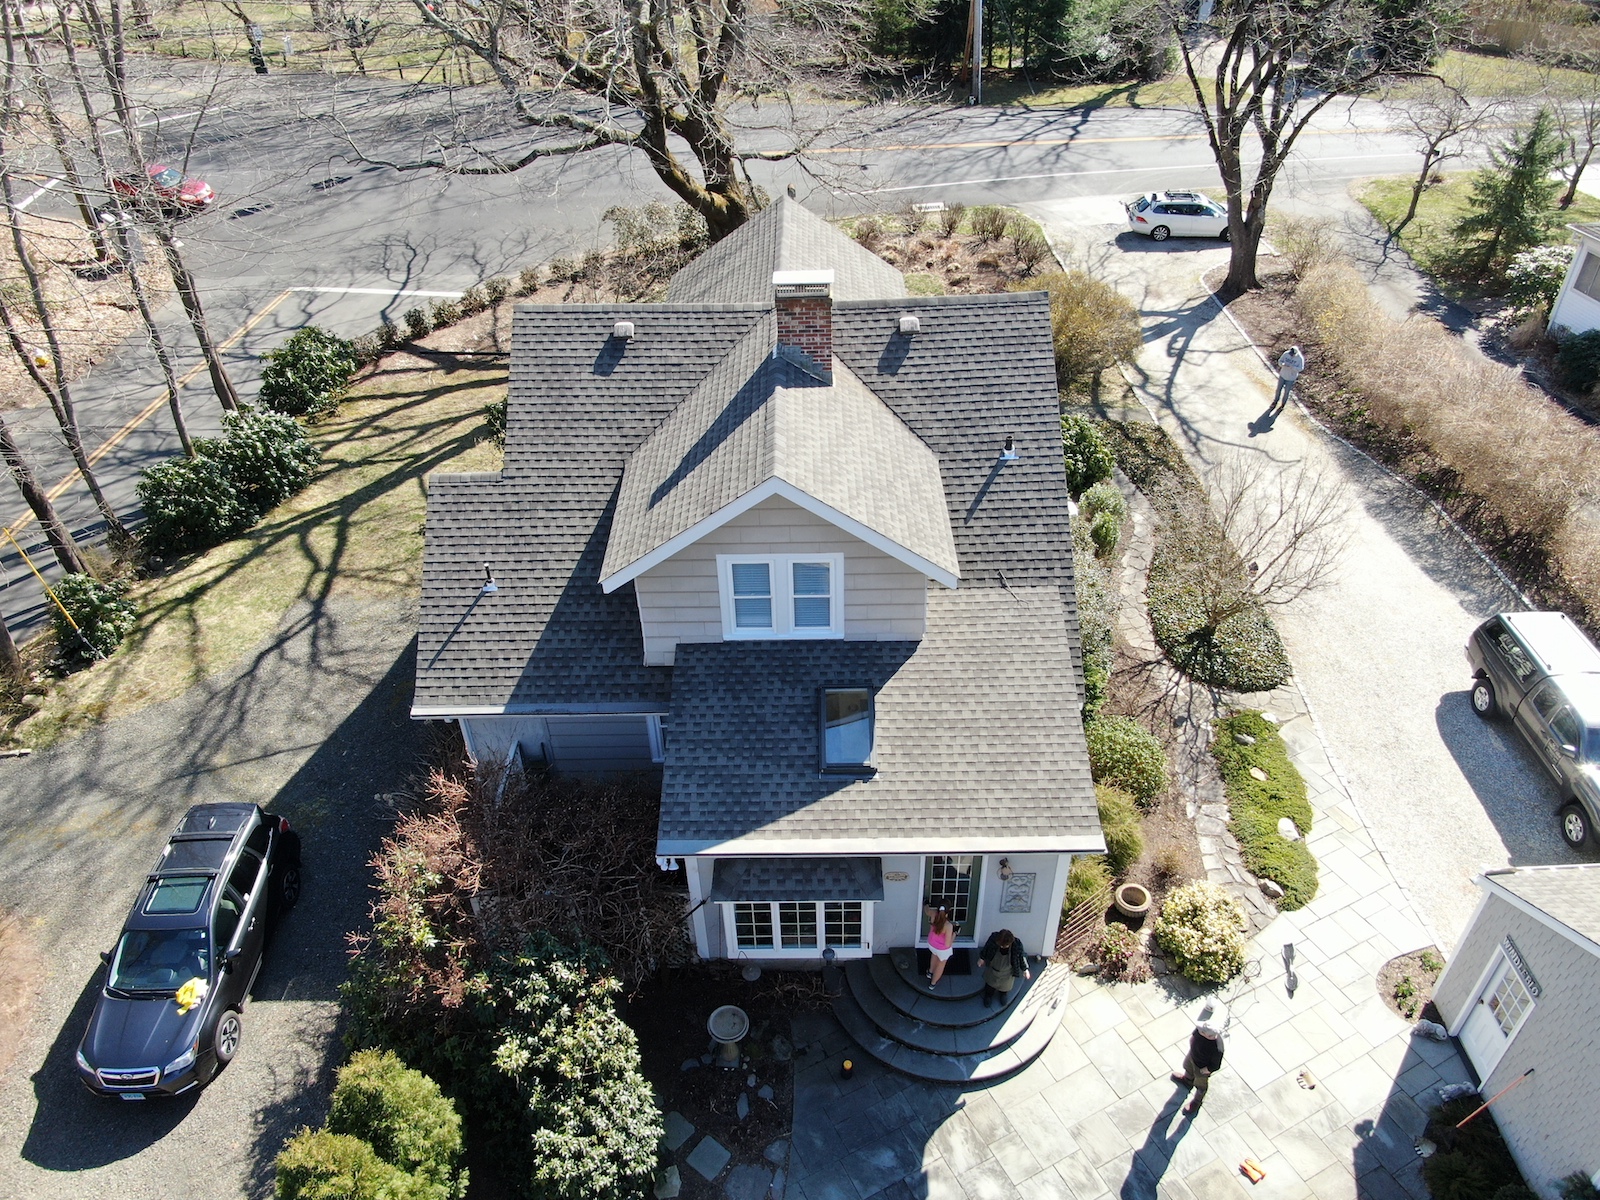 Architectural Asphalt Roof on the rear of a Madison, CT Home